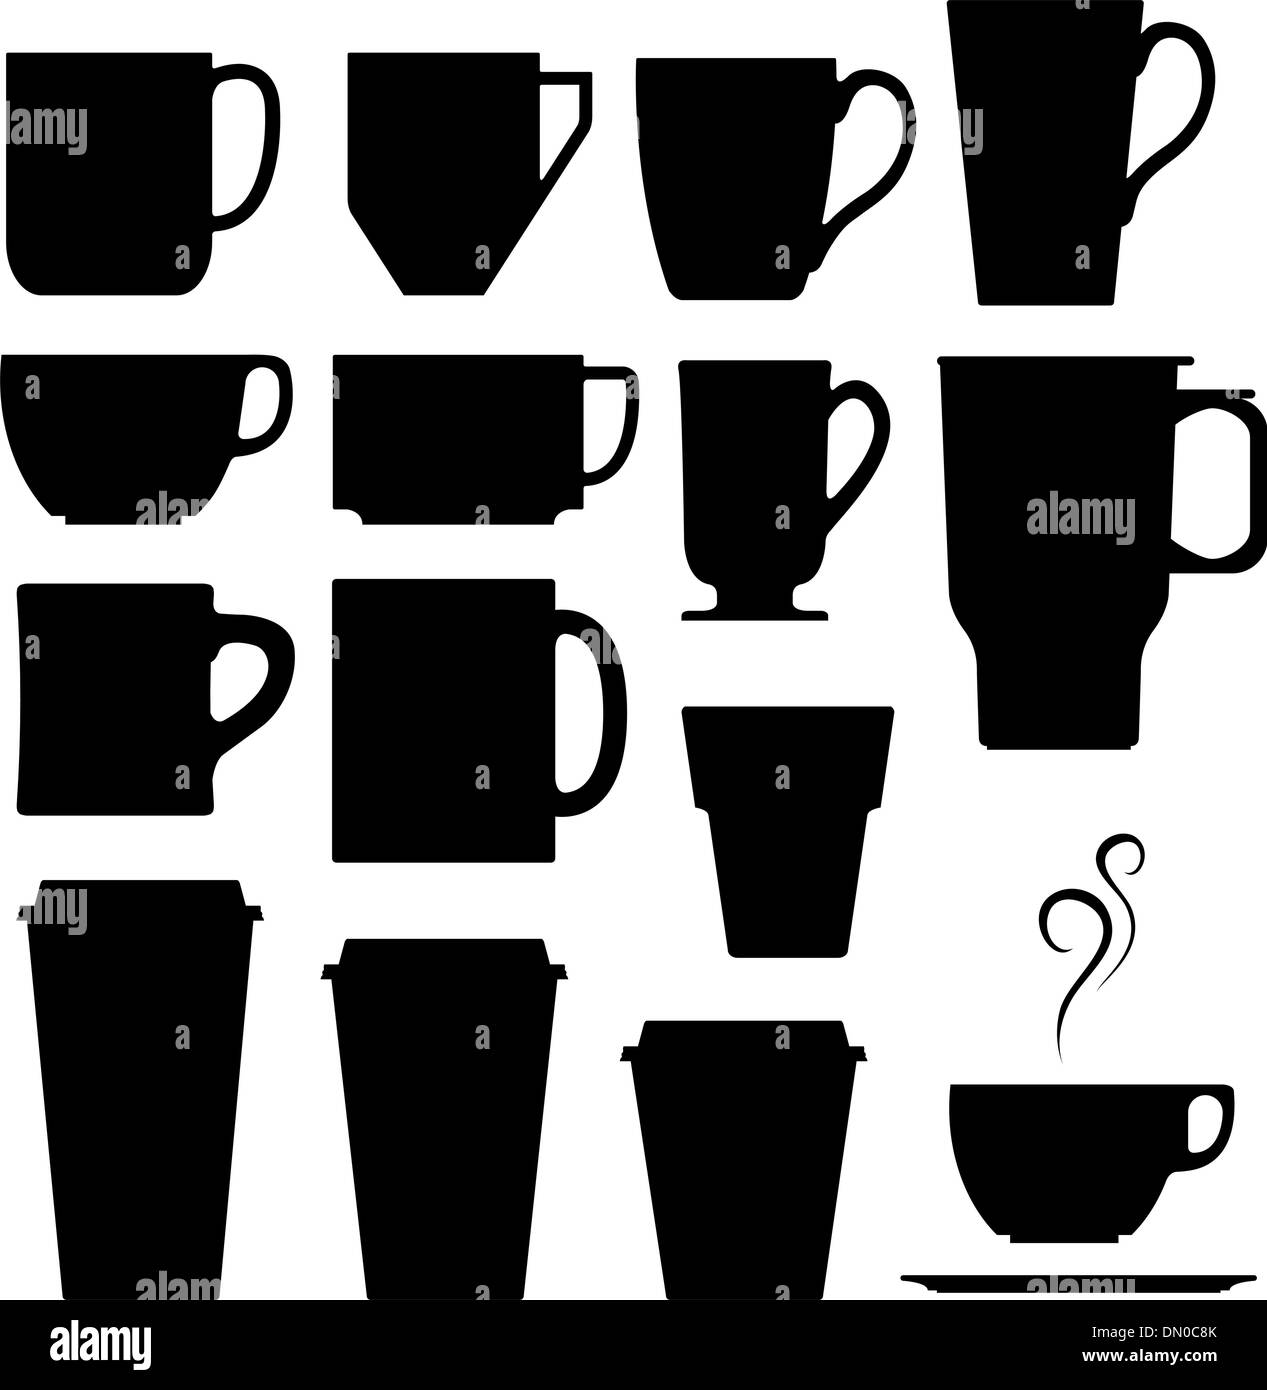 Coffee and tea mugs vector silhouettes Stock Vector